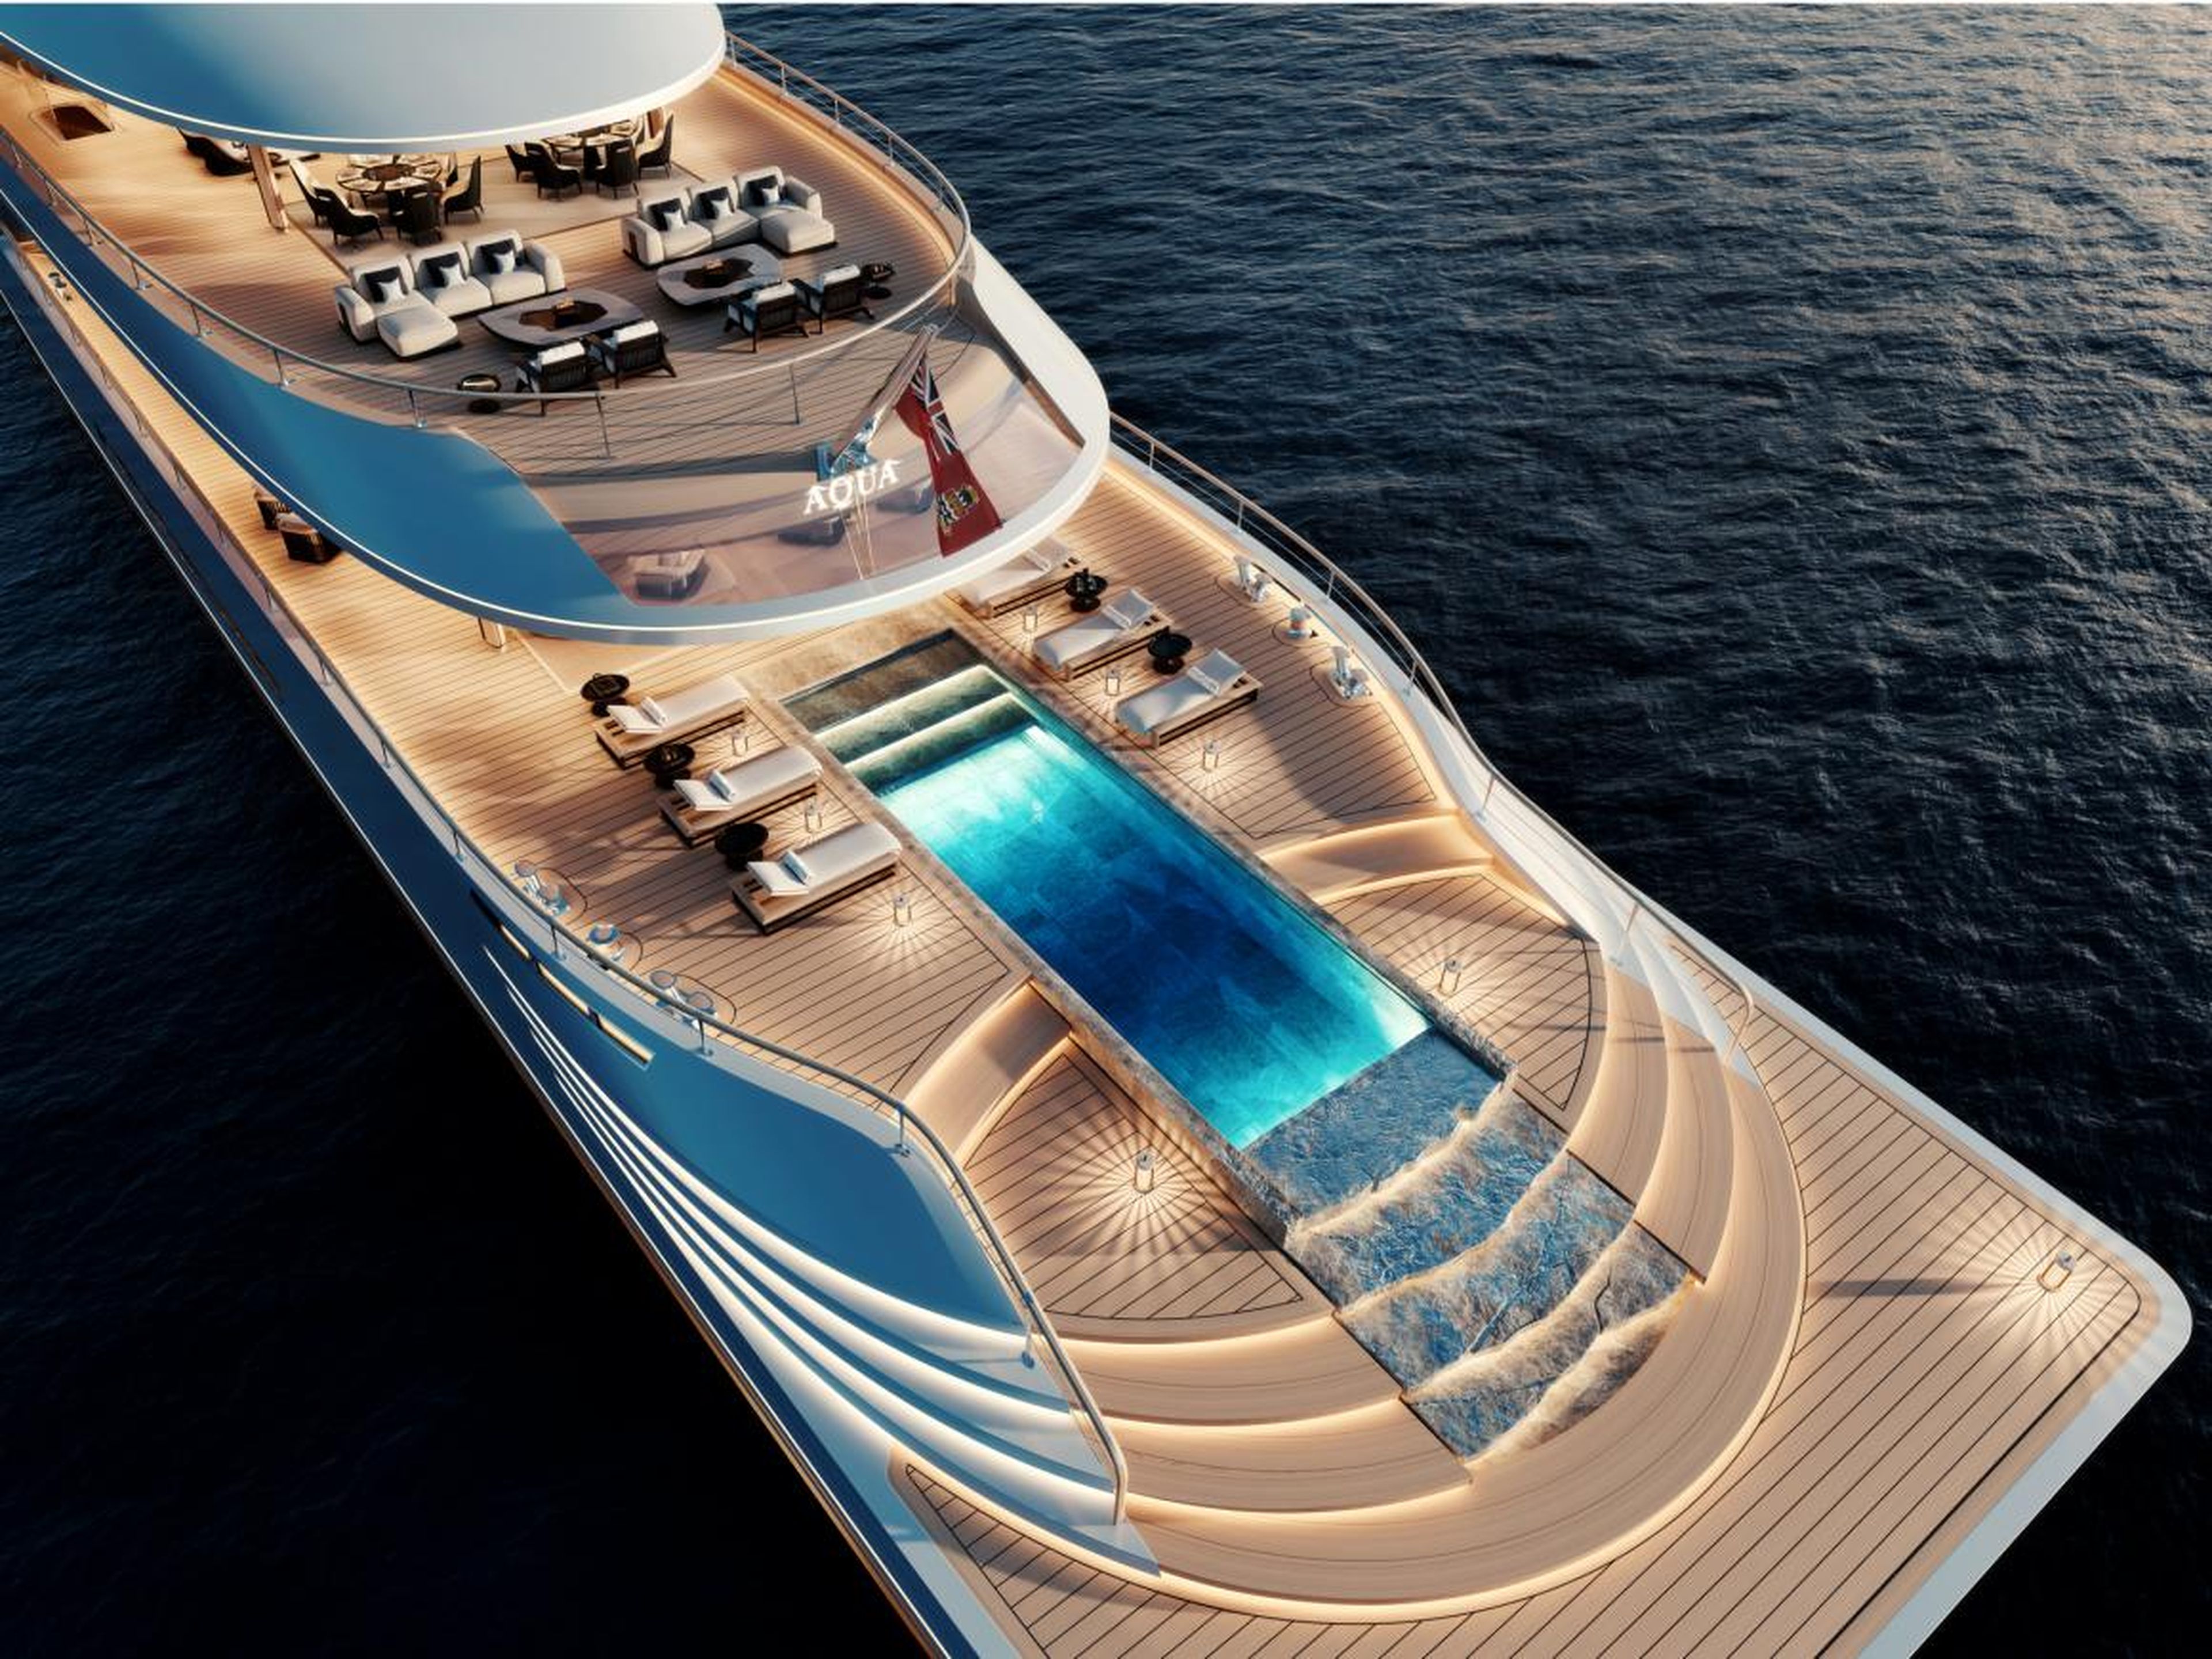 The superyacht's futuristic looks aim to complement its eco-conscious, cutting-edge technology with the luxurious air of a typical superyacht, according to the designer.